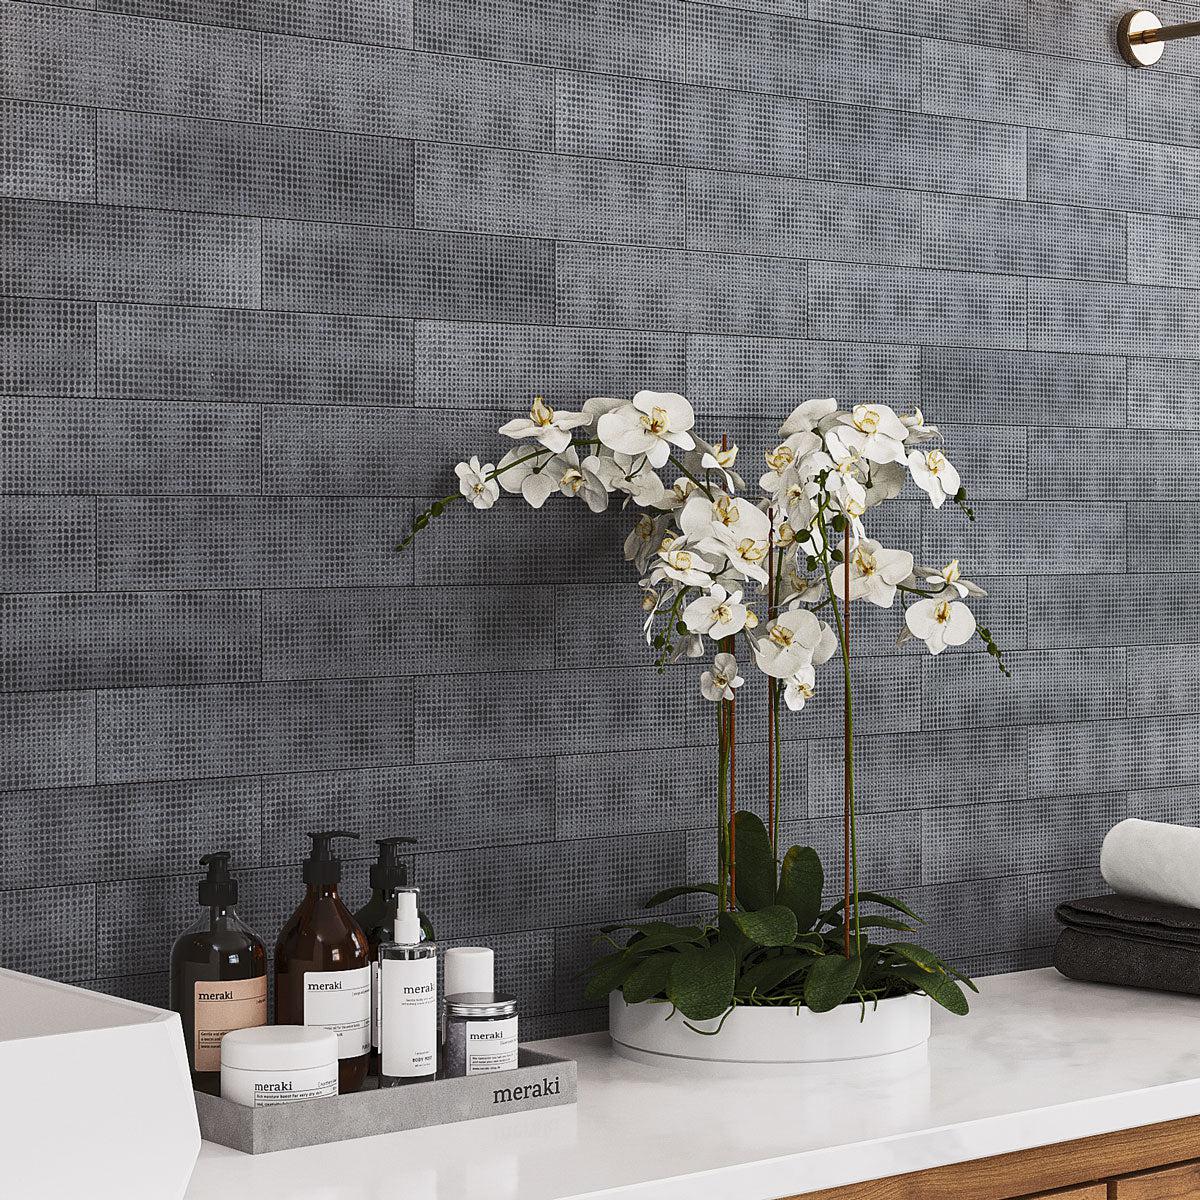 Black Dots Etched Subway Marble Tile for a textured bathroom wall